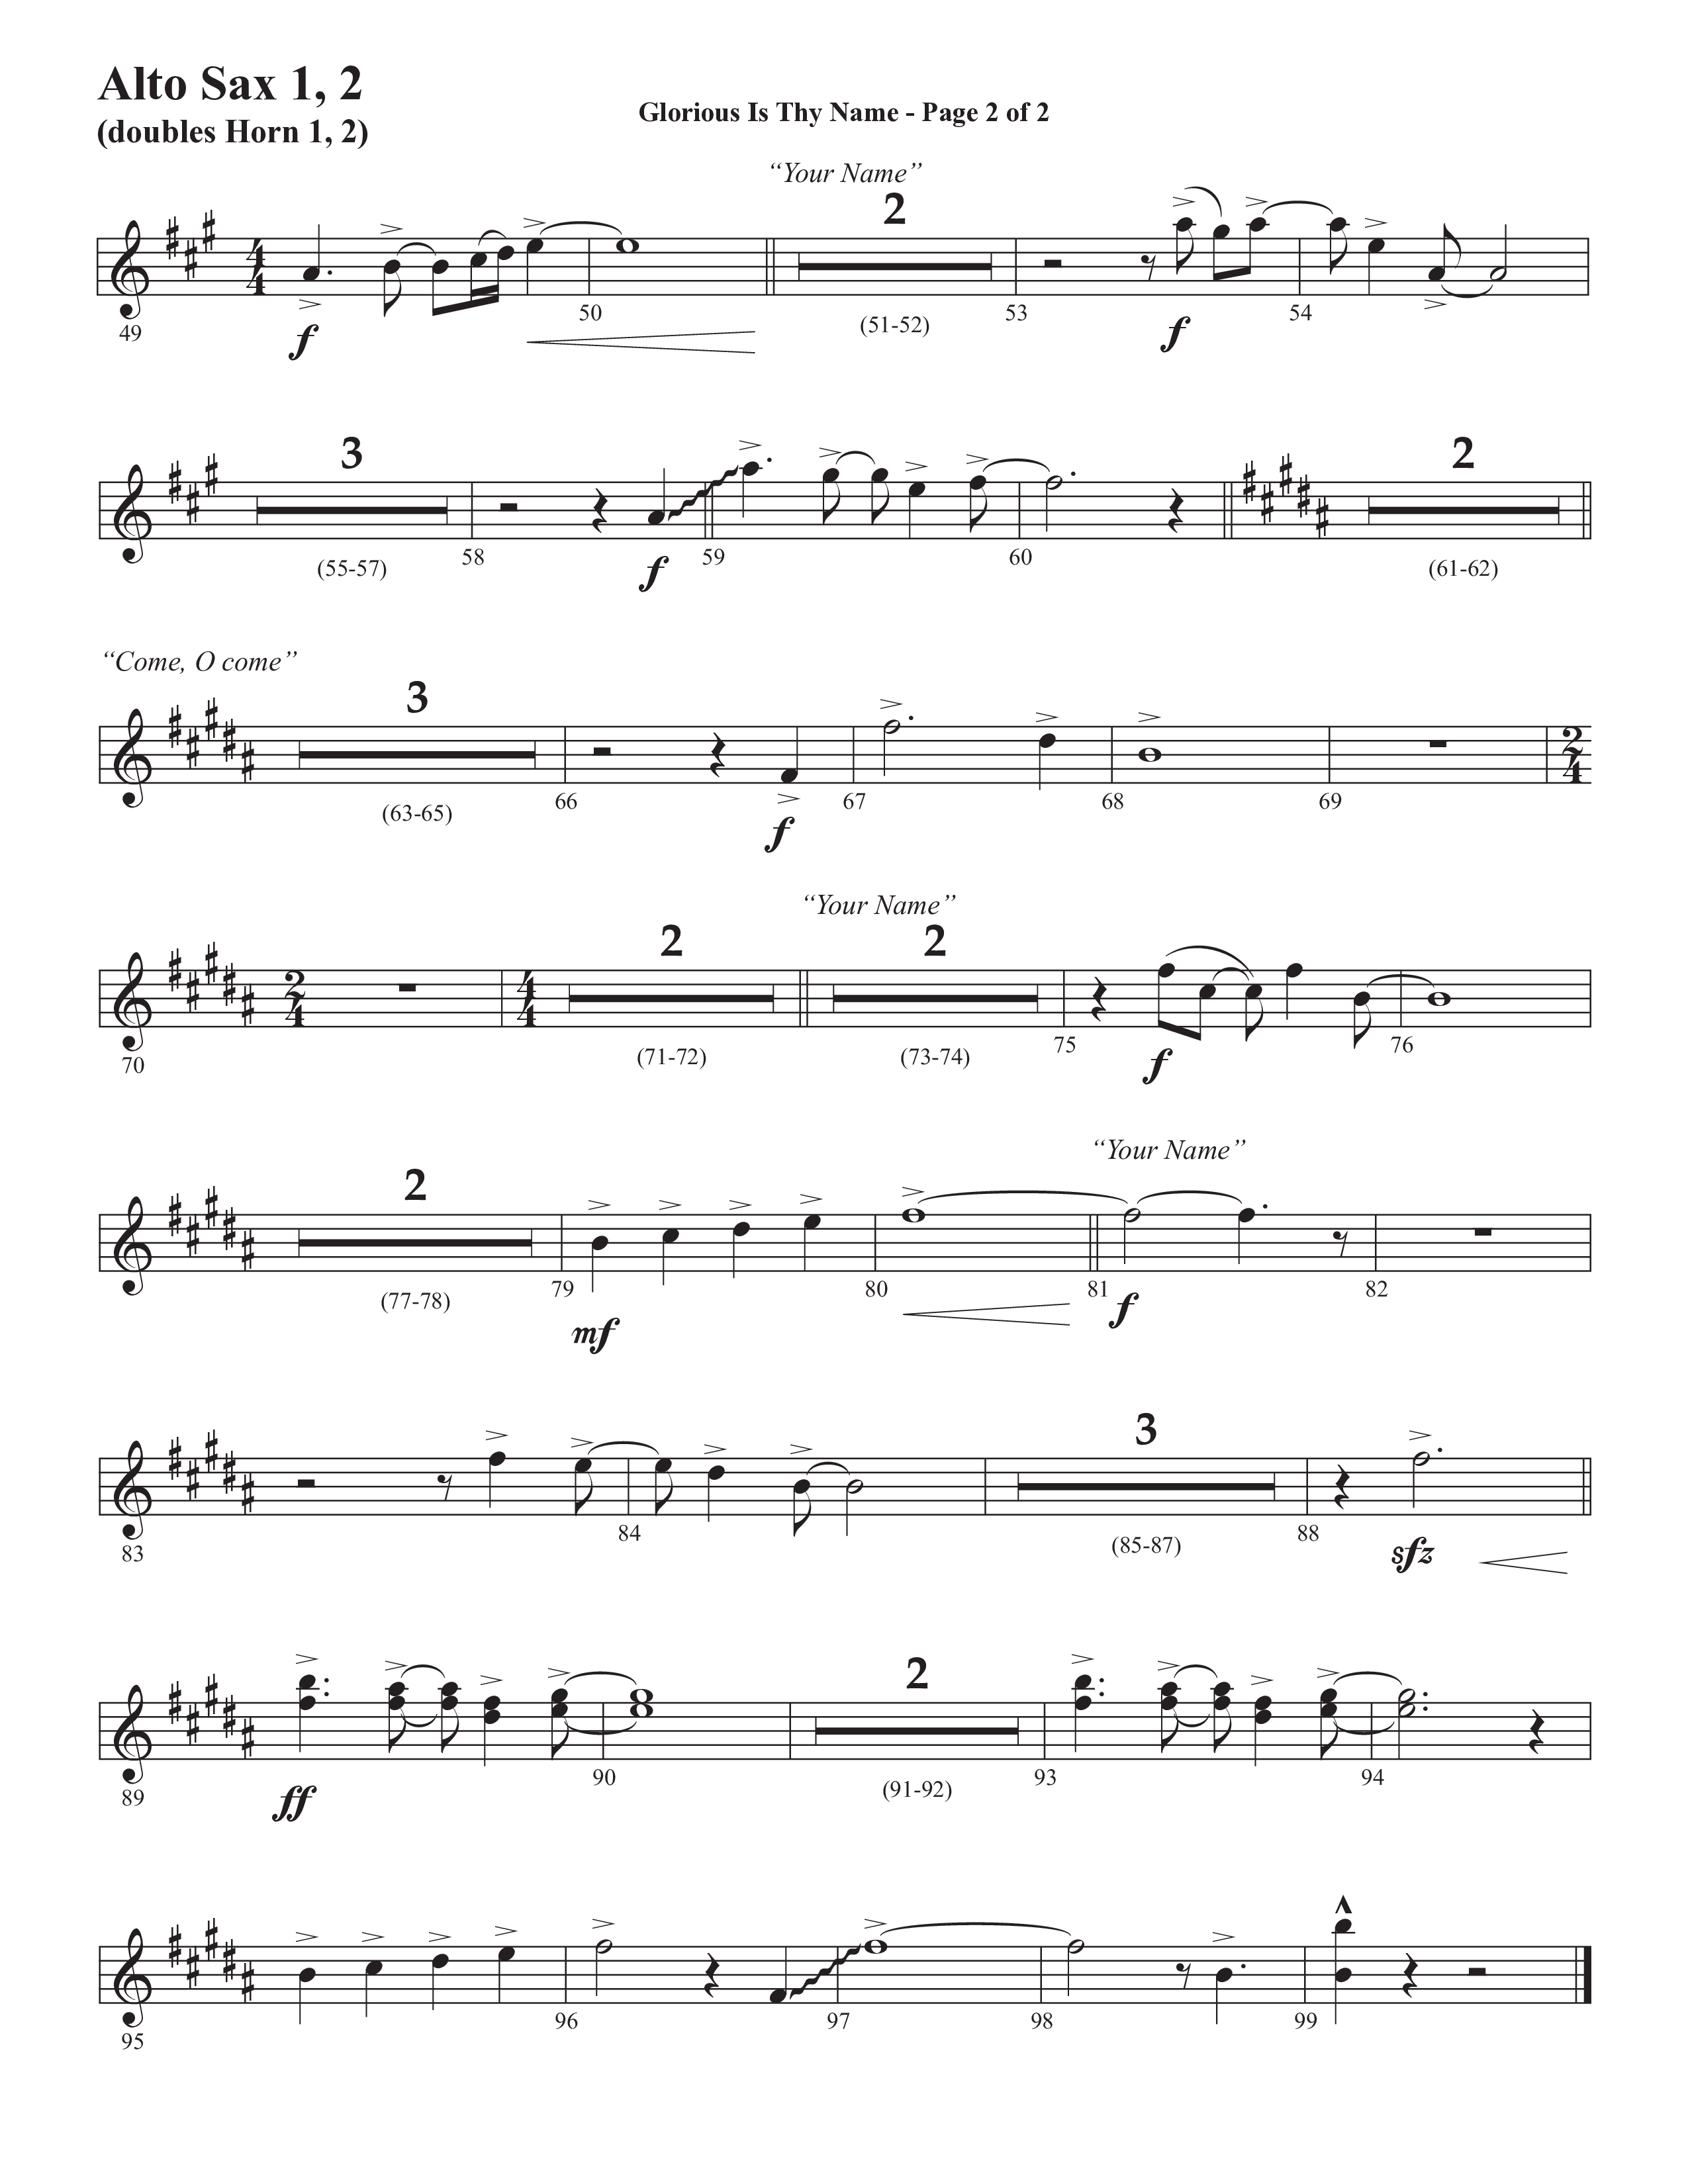 Glorious Is Thy Name (with Your Name) (Choral Anthem SATB) Alto Sax 1/2 (Semsen Music / Arr. John Bolin / Orch. Cliff Duren)